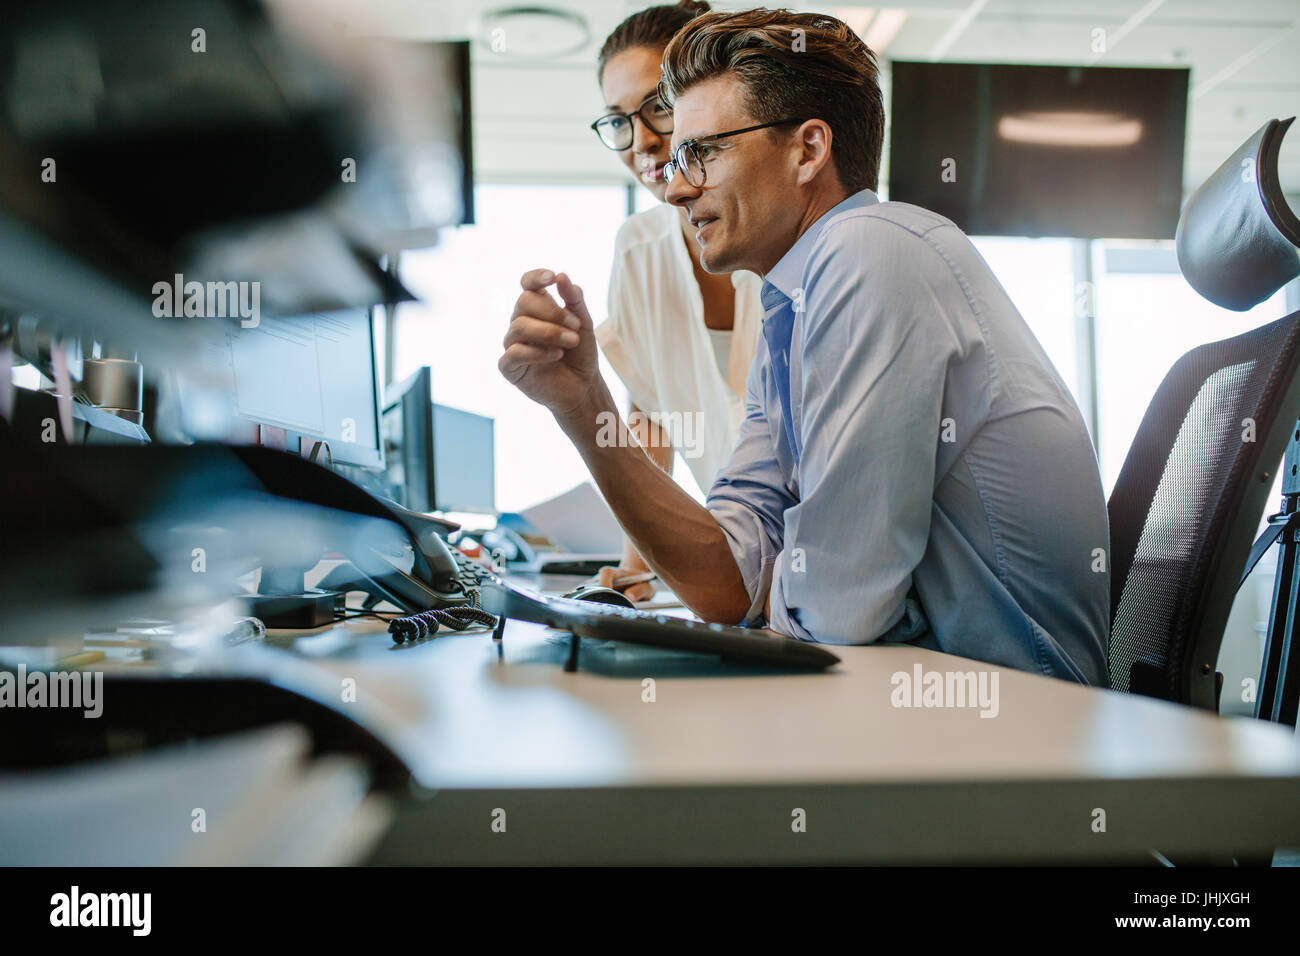 Side view of a mature businessman and businesswoman working together on desktop computer. Two business professionals looking at computer monitor. Stock Photo